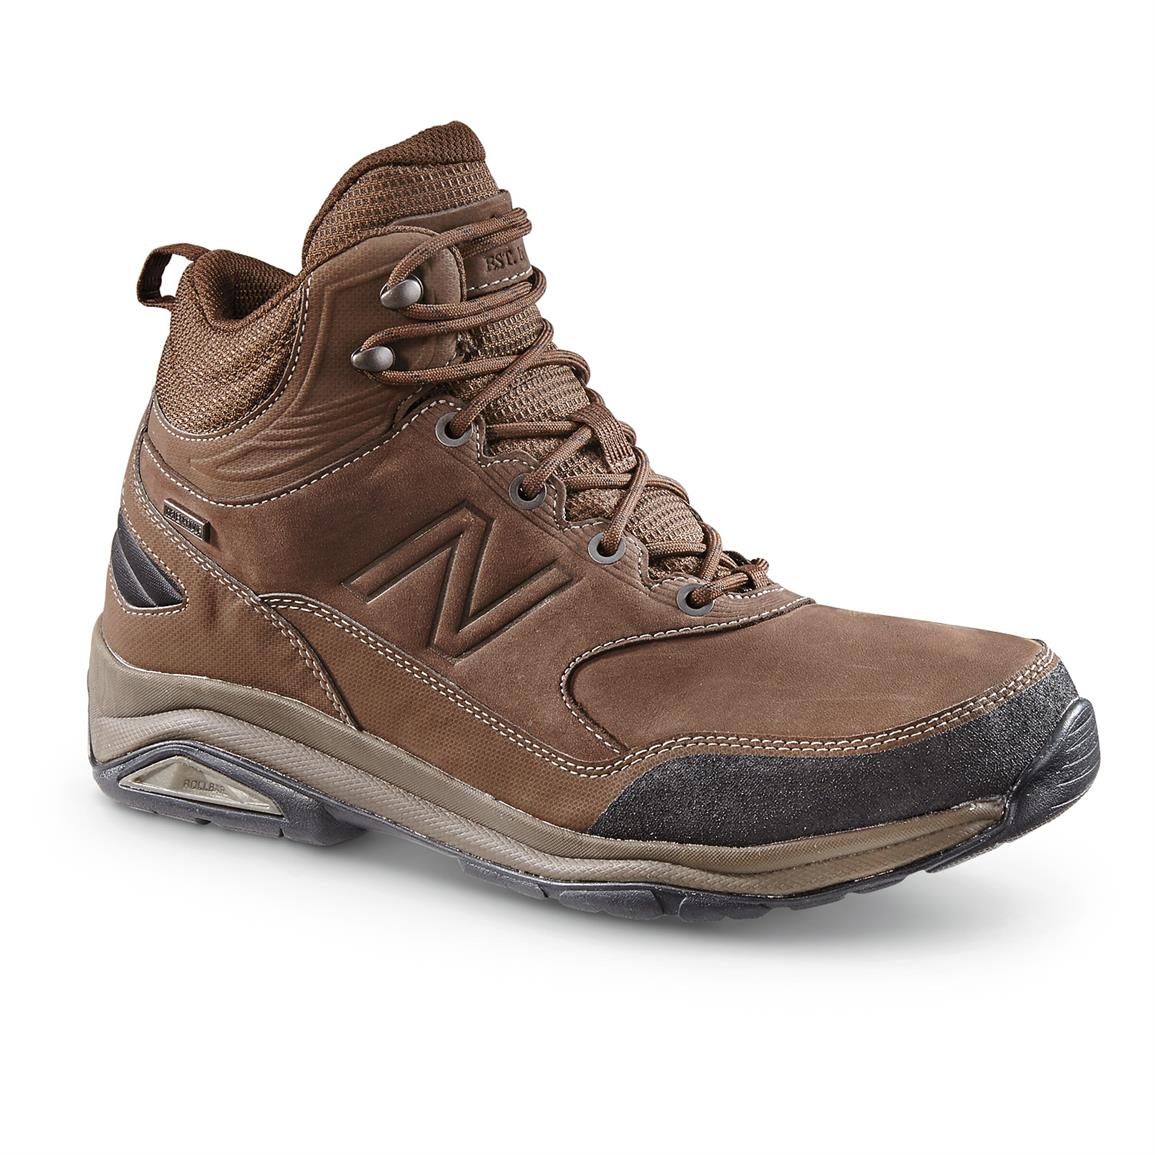 Boots for Every Environment and Surface: Embrace Comfort and Versatility